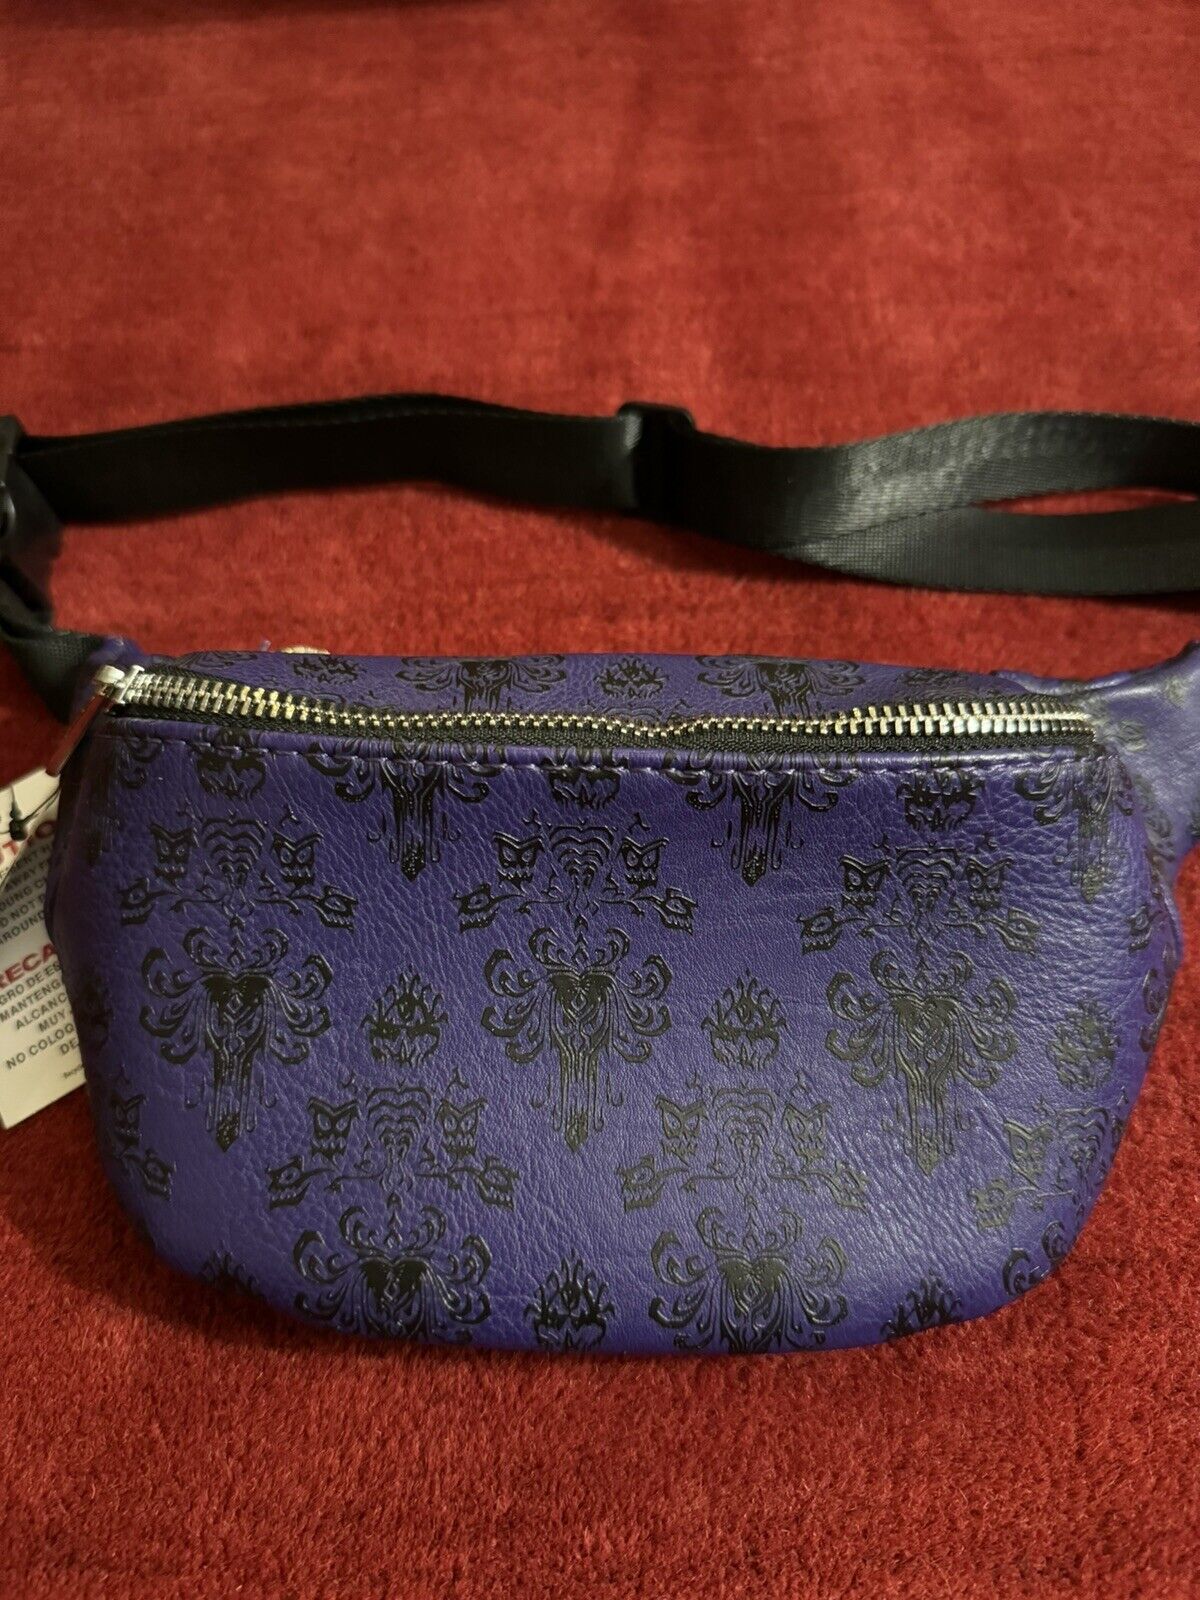 New Disney Parks Loungefly Haunted Mansion Wallpaper Fanny Pack Cross Body Bag